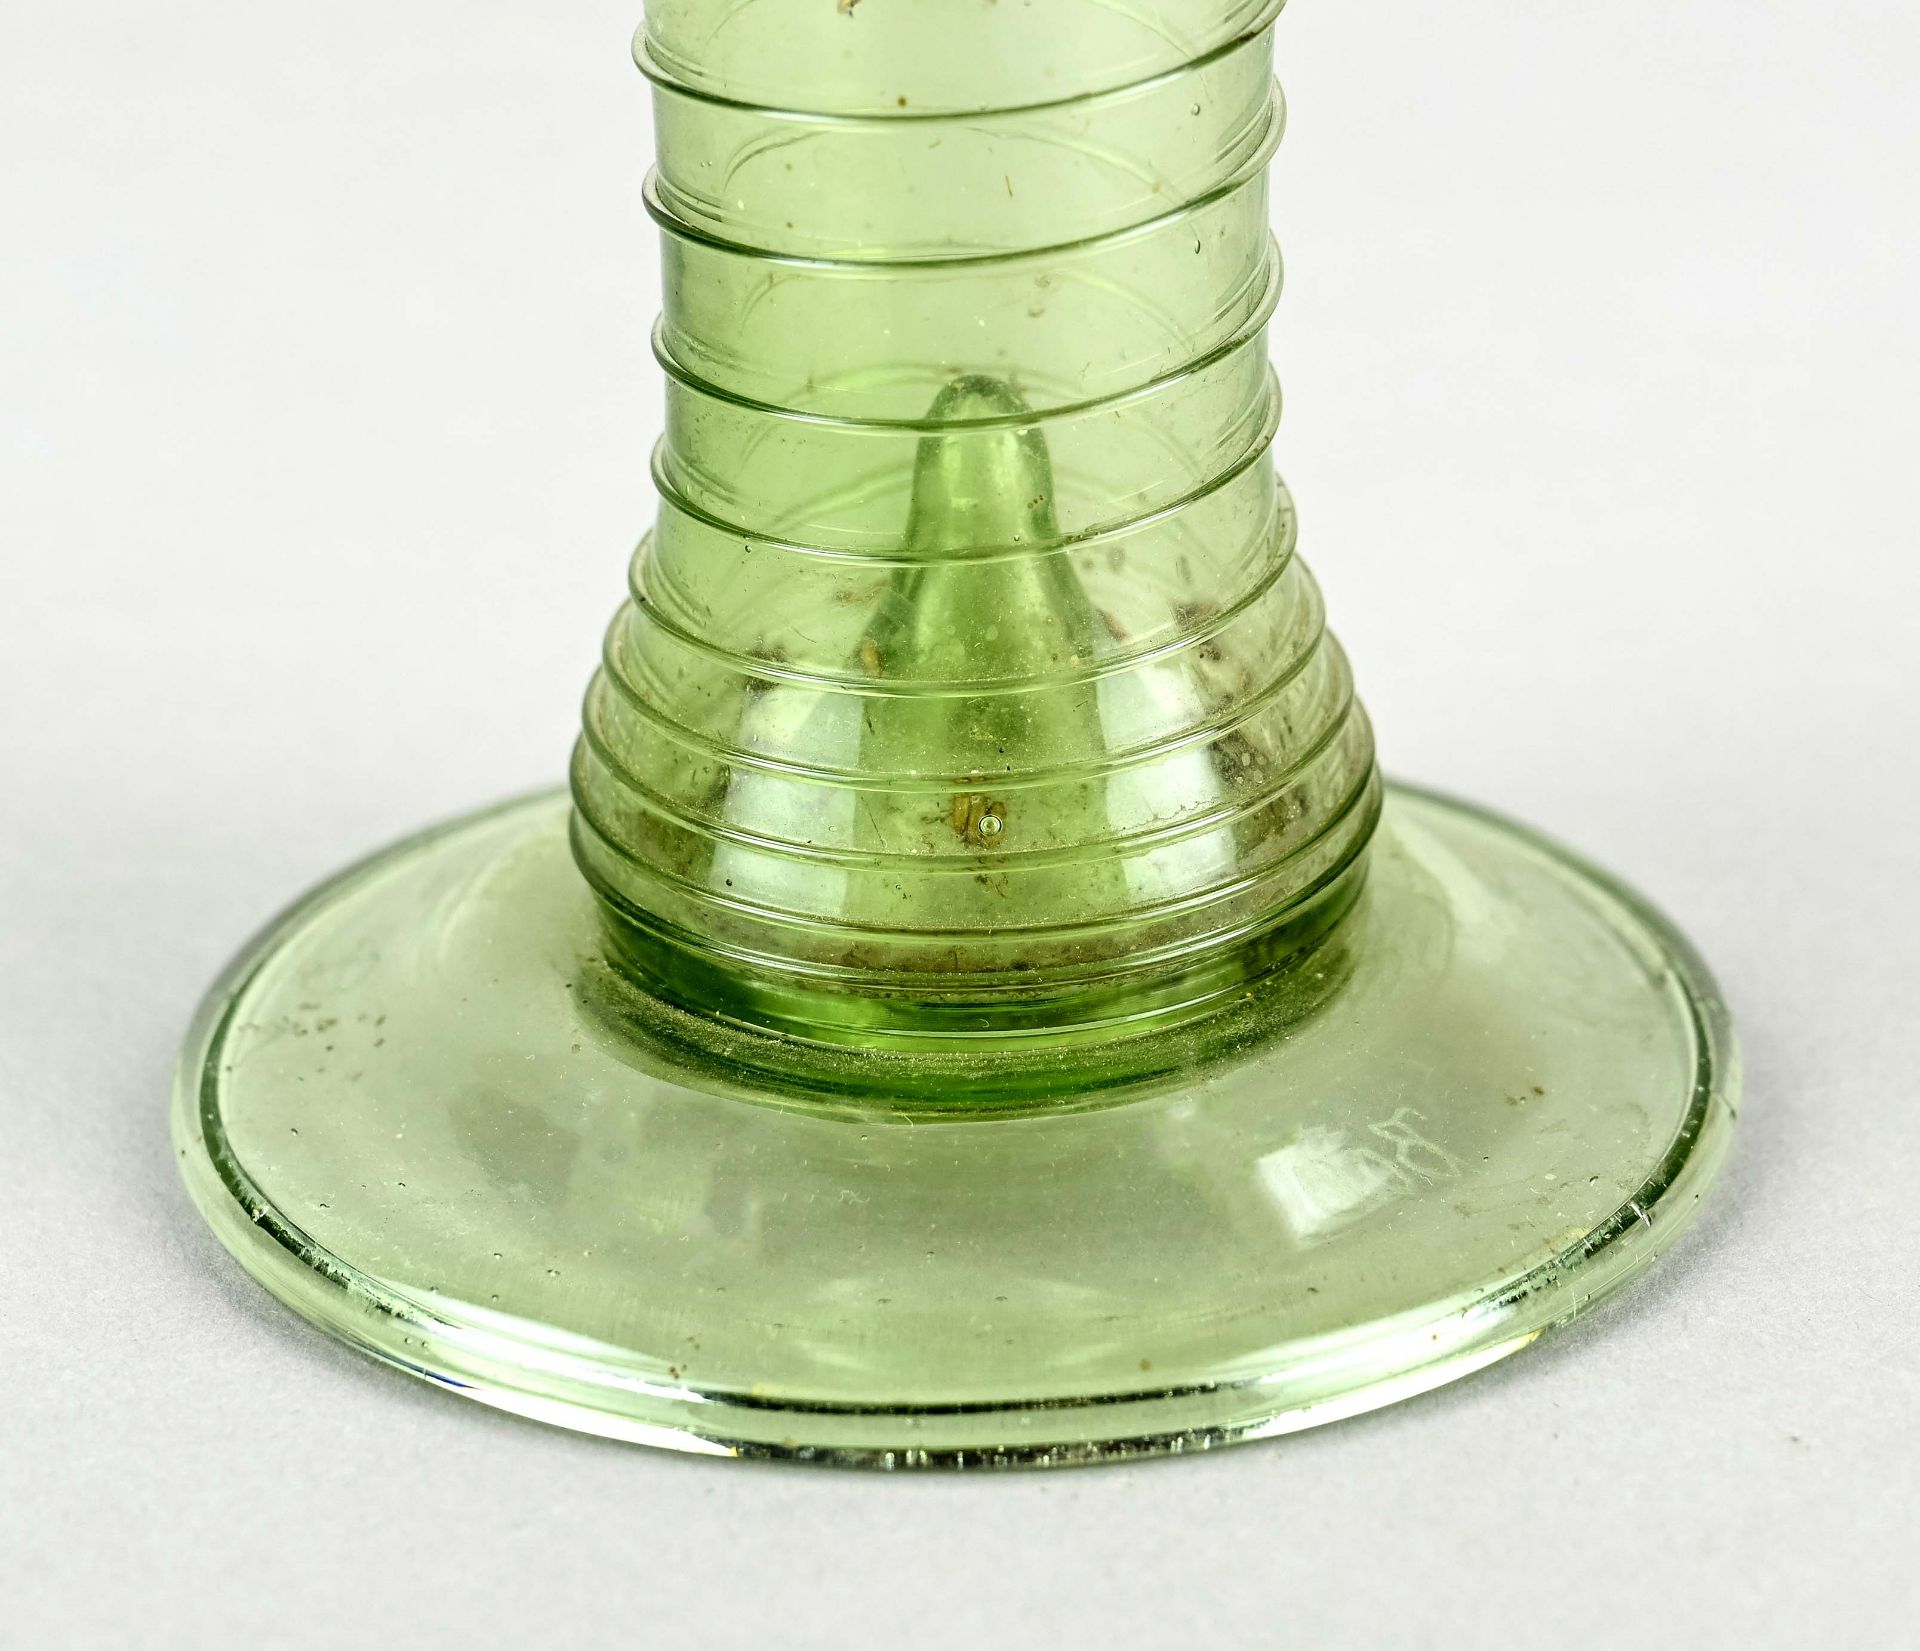 Glass, Germany/Austria, 19th century, "Noppenglas", light green glass, B.O.N?, 92 signed, height 32 - Image 2 of 3